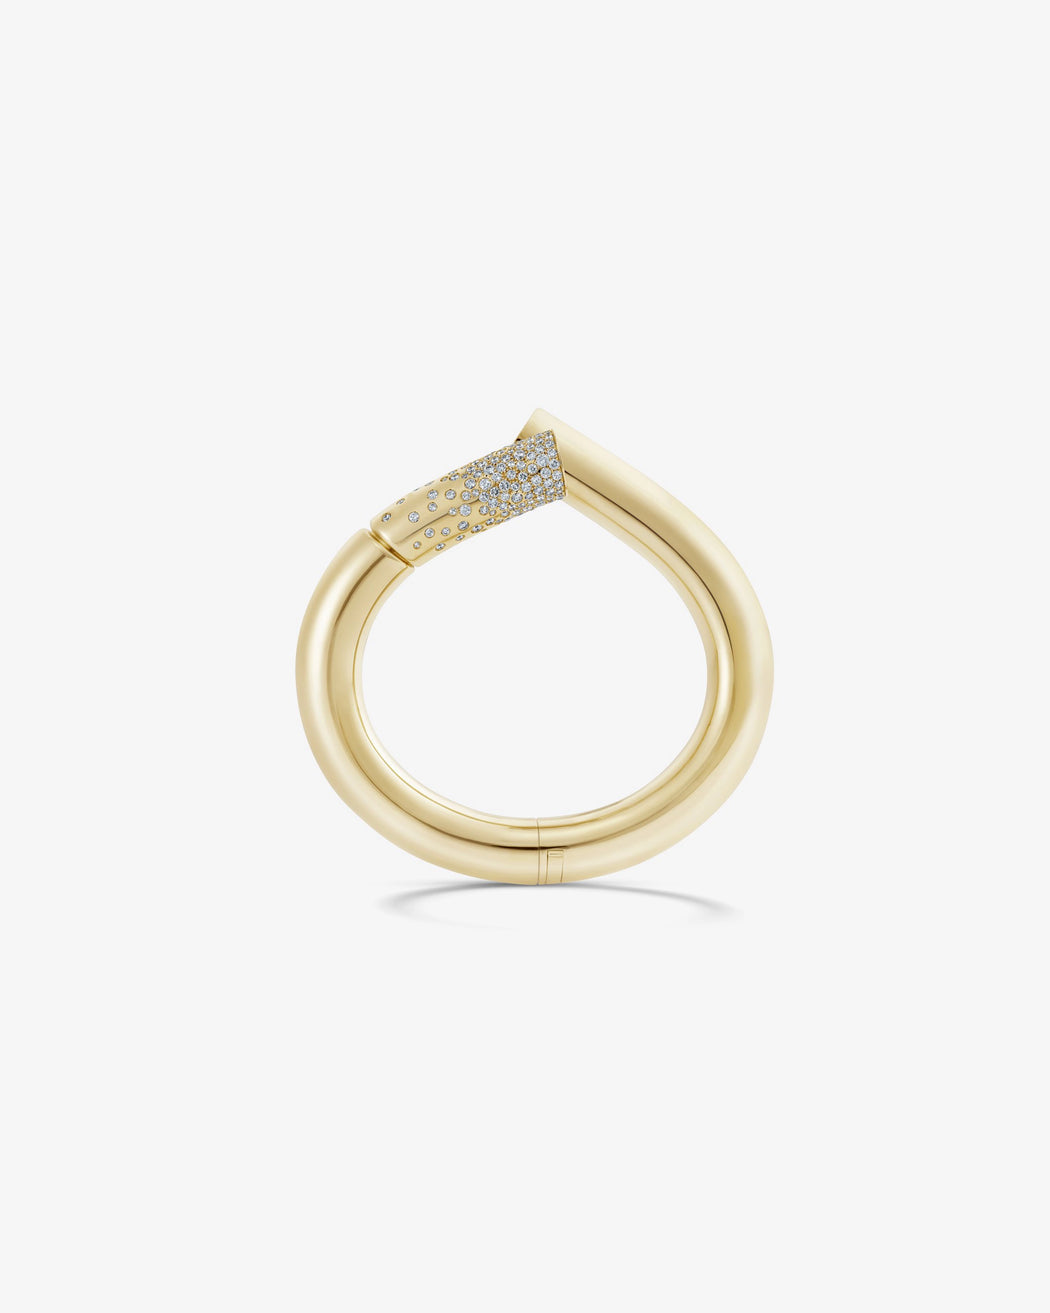 Oera bracelet 18k Fairmined yellow gold and diamonds, Tabayer ethical fine jewelry